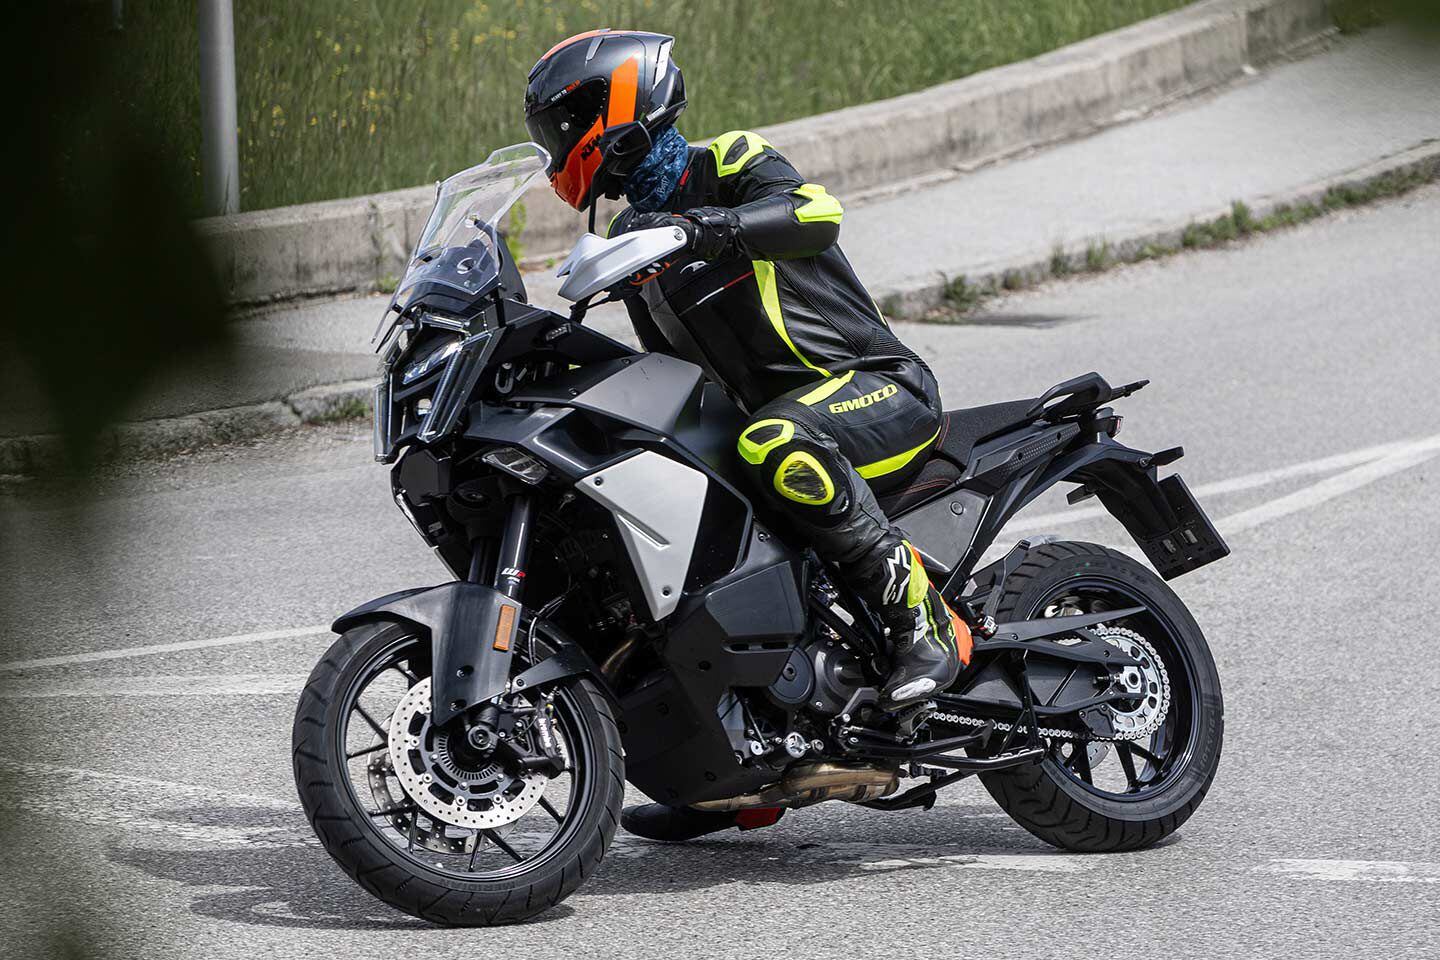 We believe this second model caught testing is the 2025 KTM 1390 Super Adventure S model. It features more street-oriented rubber and what appears to be a 19-inch front wheel instead of the Rally’s 21-incher.